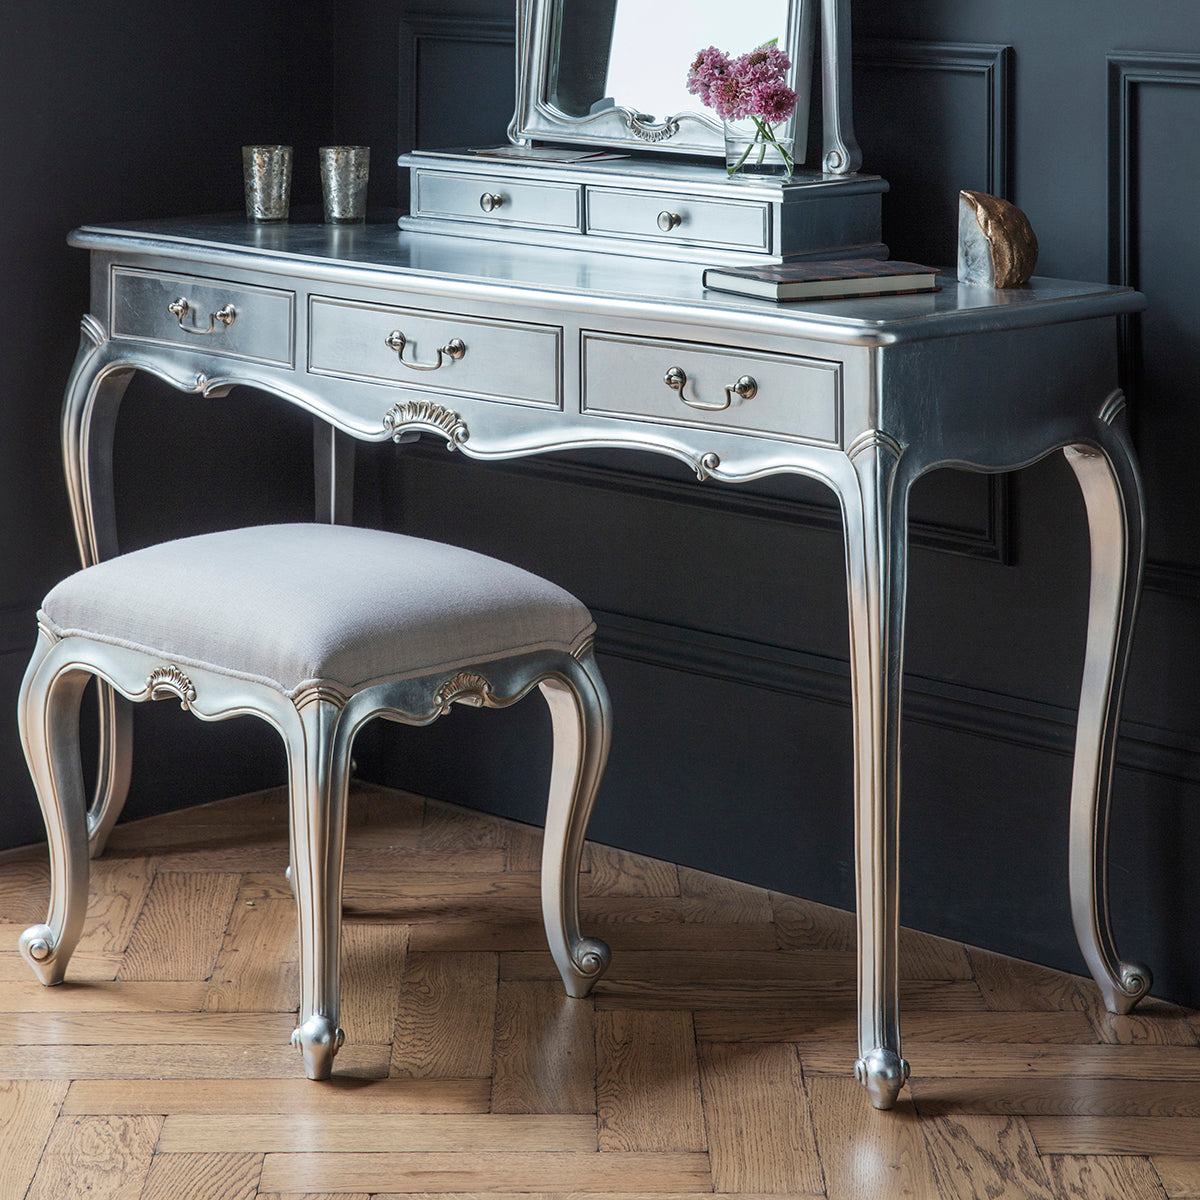 A Holne Dressing Table Silver with mirror and stool, perfect for interior decor as home furniture from Kikiathome.co.uk.